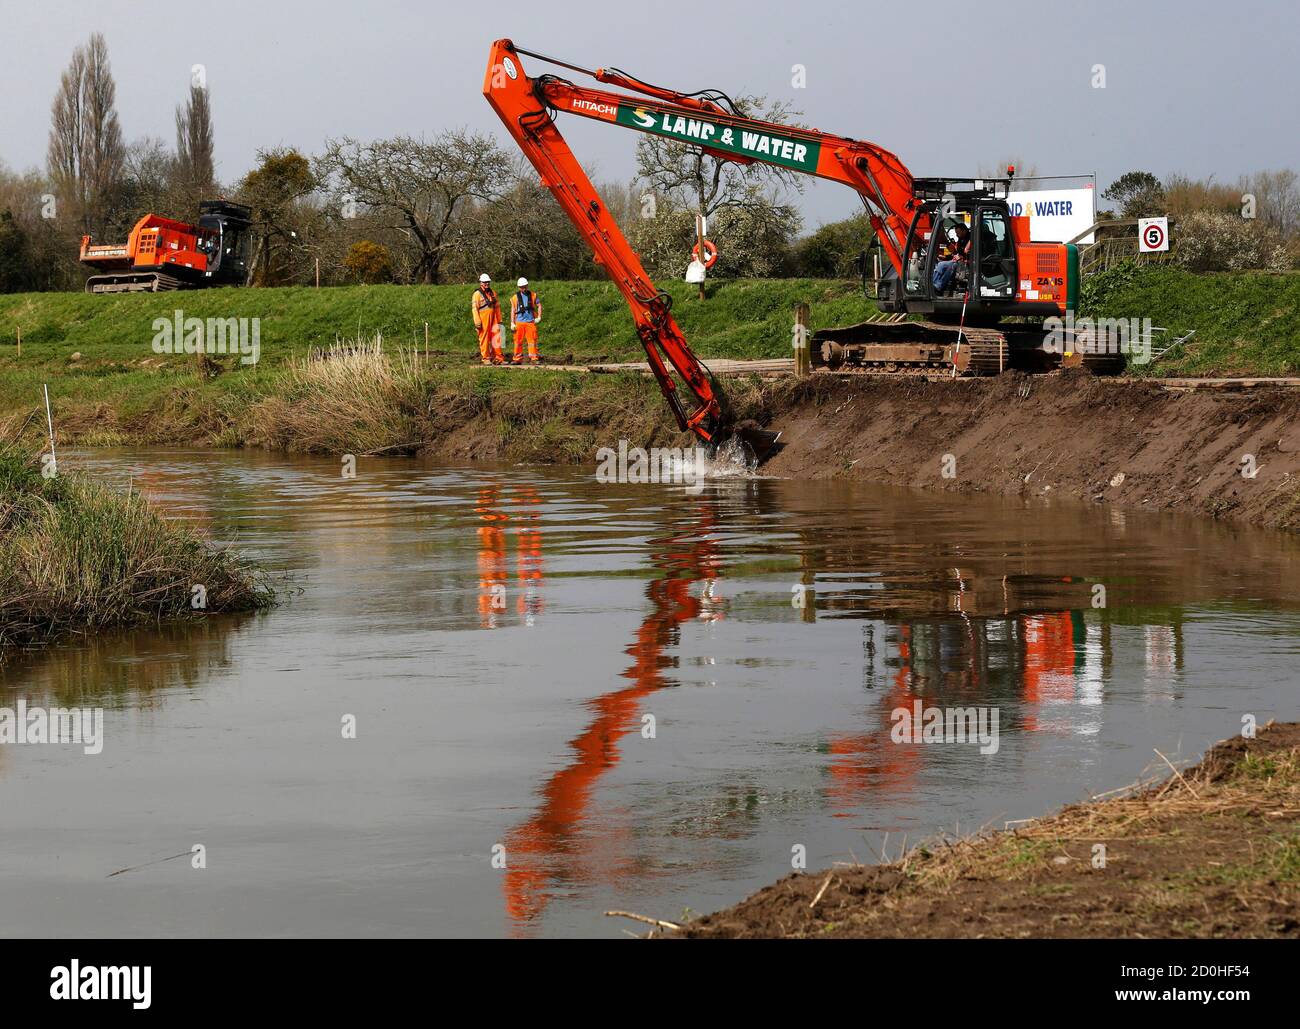 Workmen begin dredging work on the River Parrett at Burrowbridge, following severe flooding in the  Somerset Levels earlier in the year, in southwest England March 31, 2014.  REUTERS/Luke MacGregor  (BRITAIN - Tags: POLITICS ENVIRONMENT SOCIETY) Stock Photo